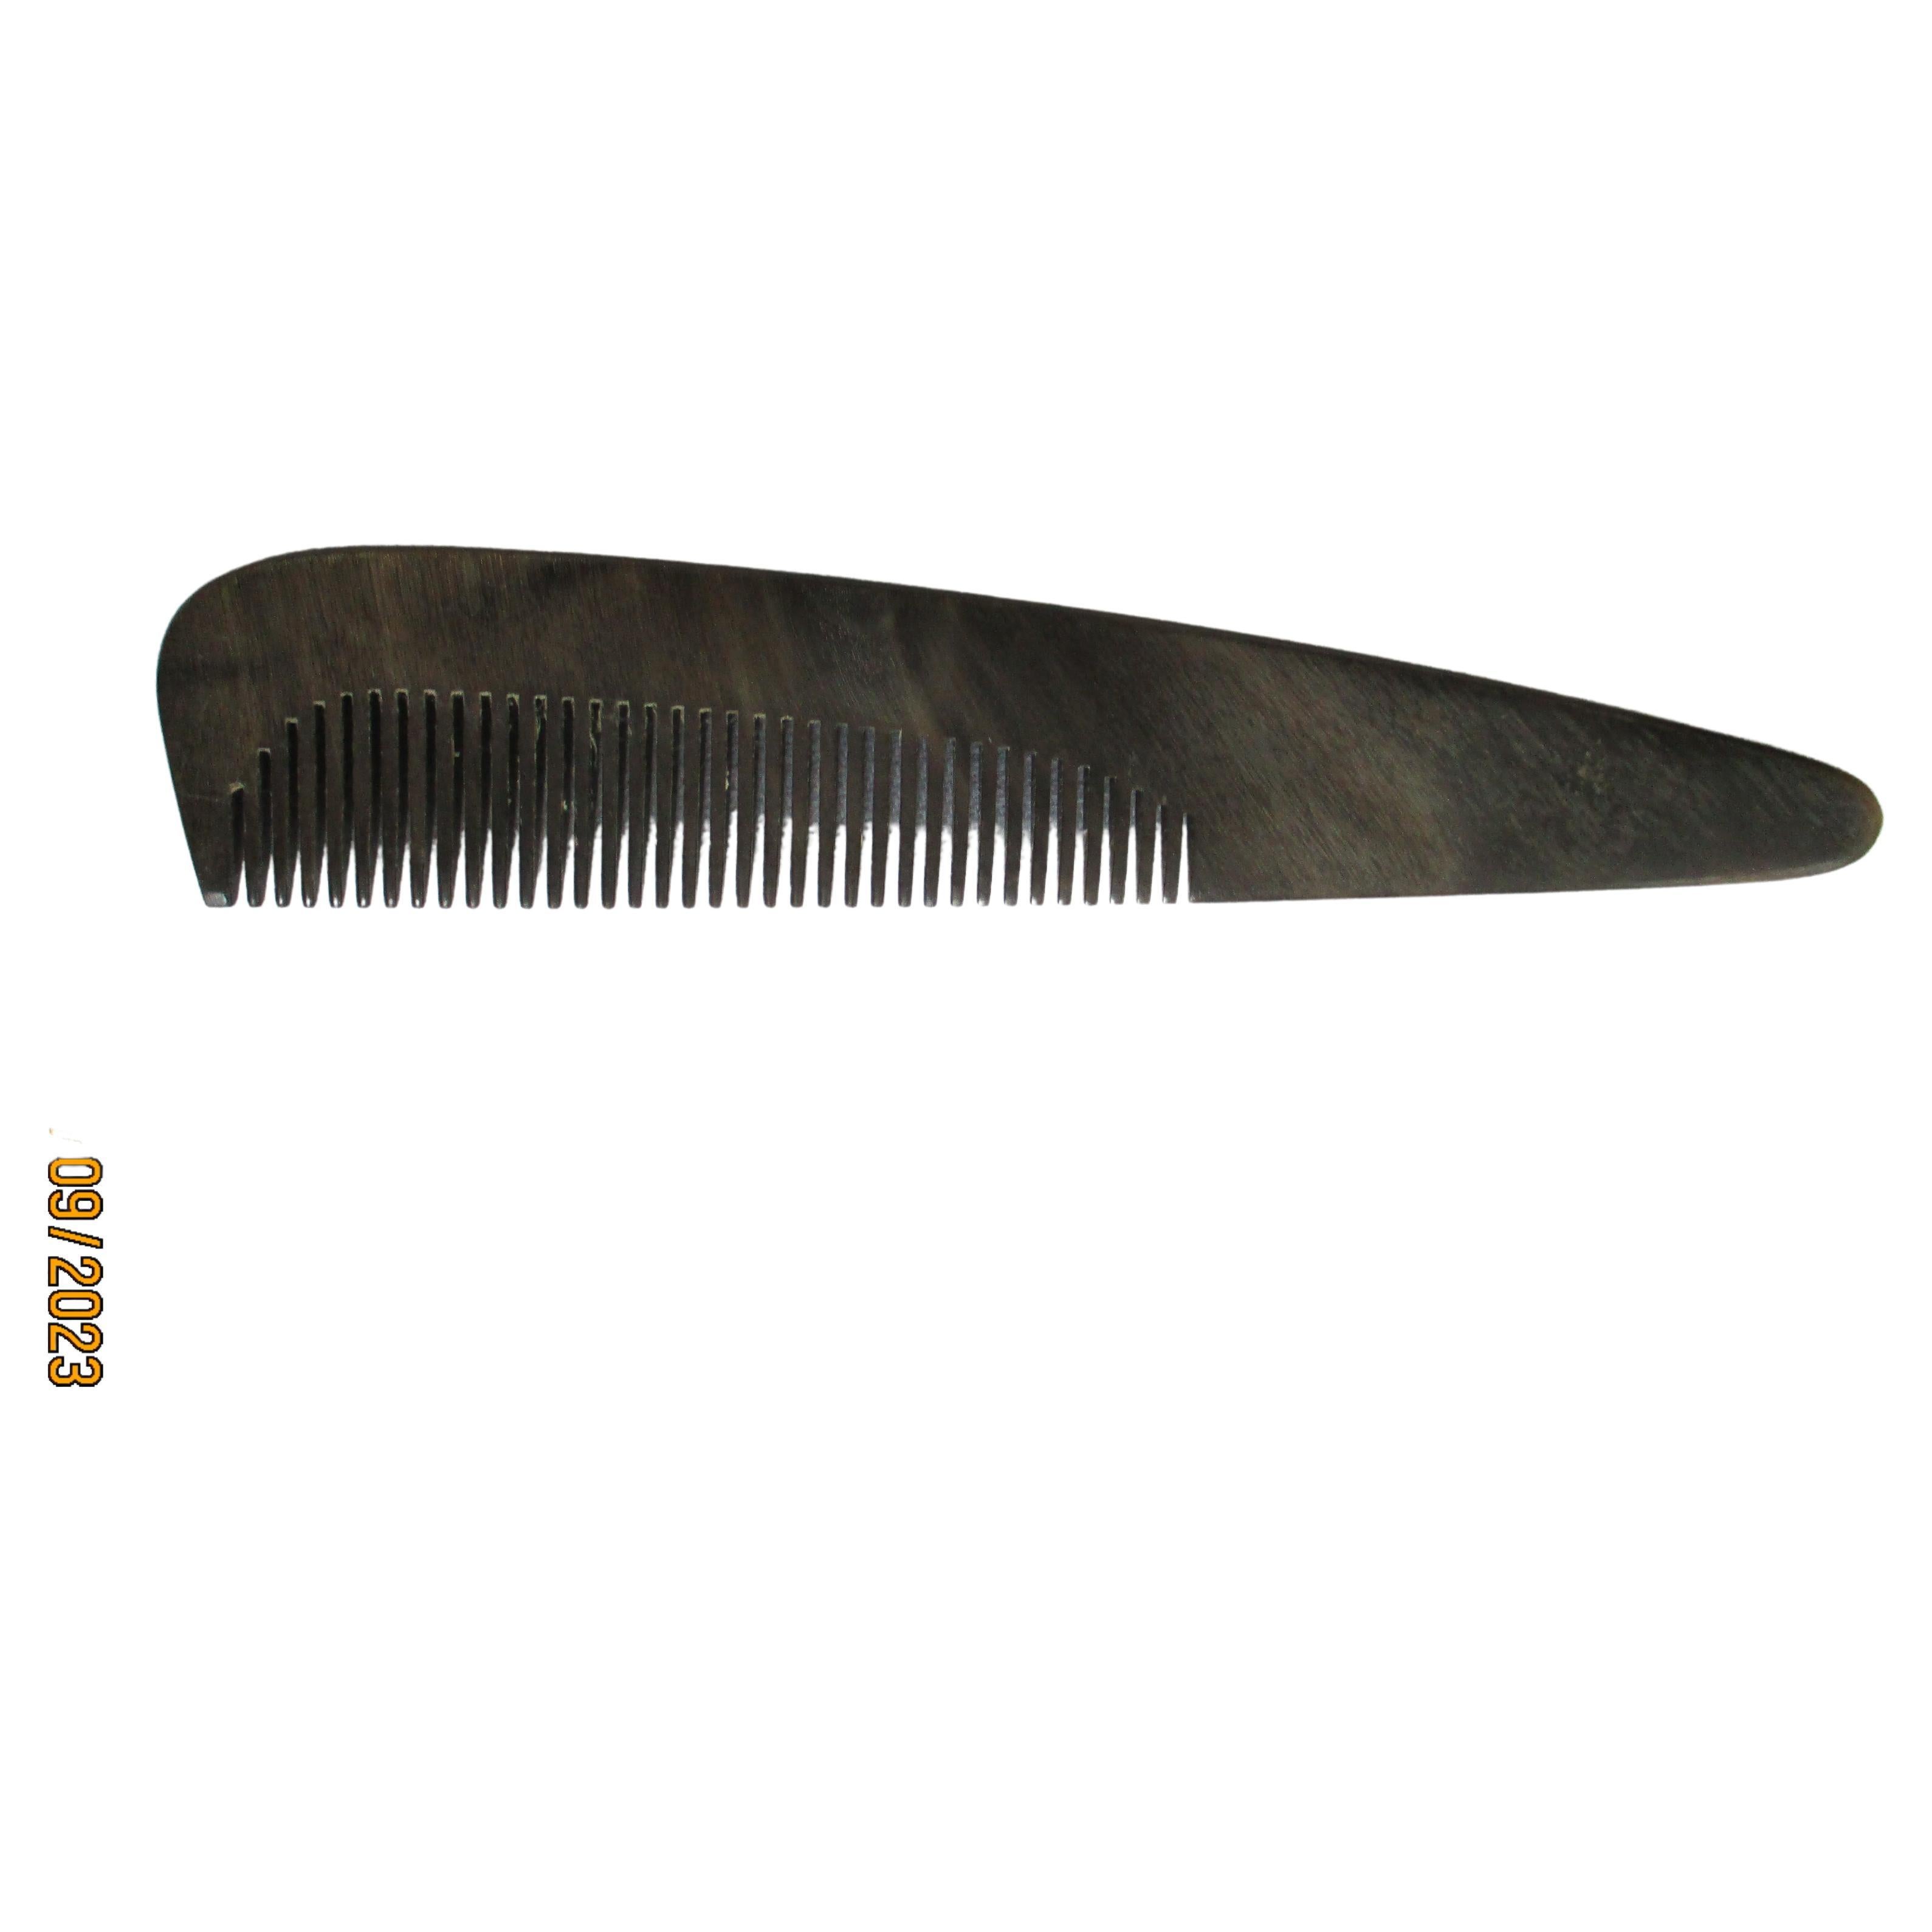 Original Midcentury Auböck Comb Made from Horn